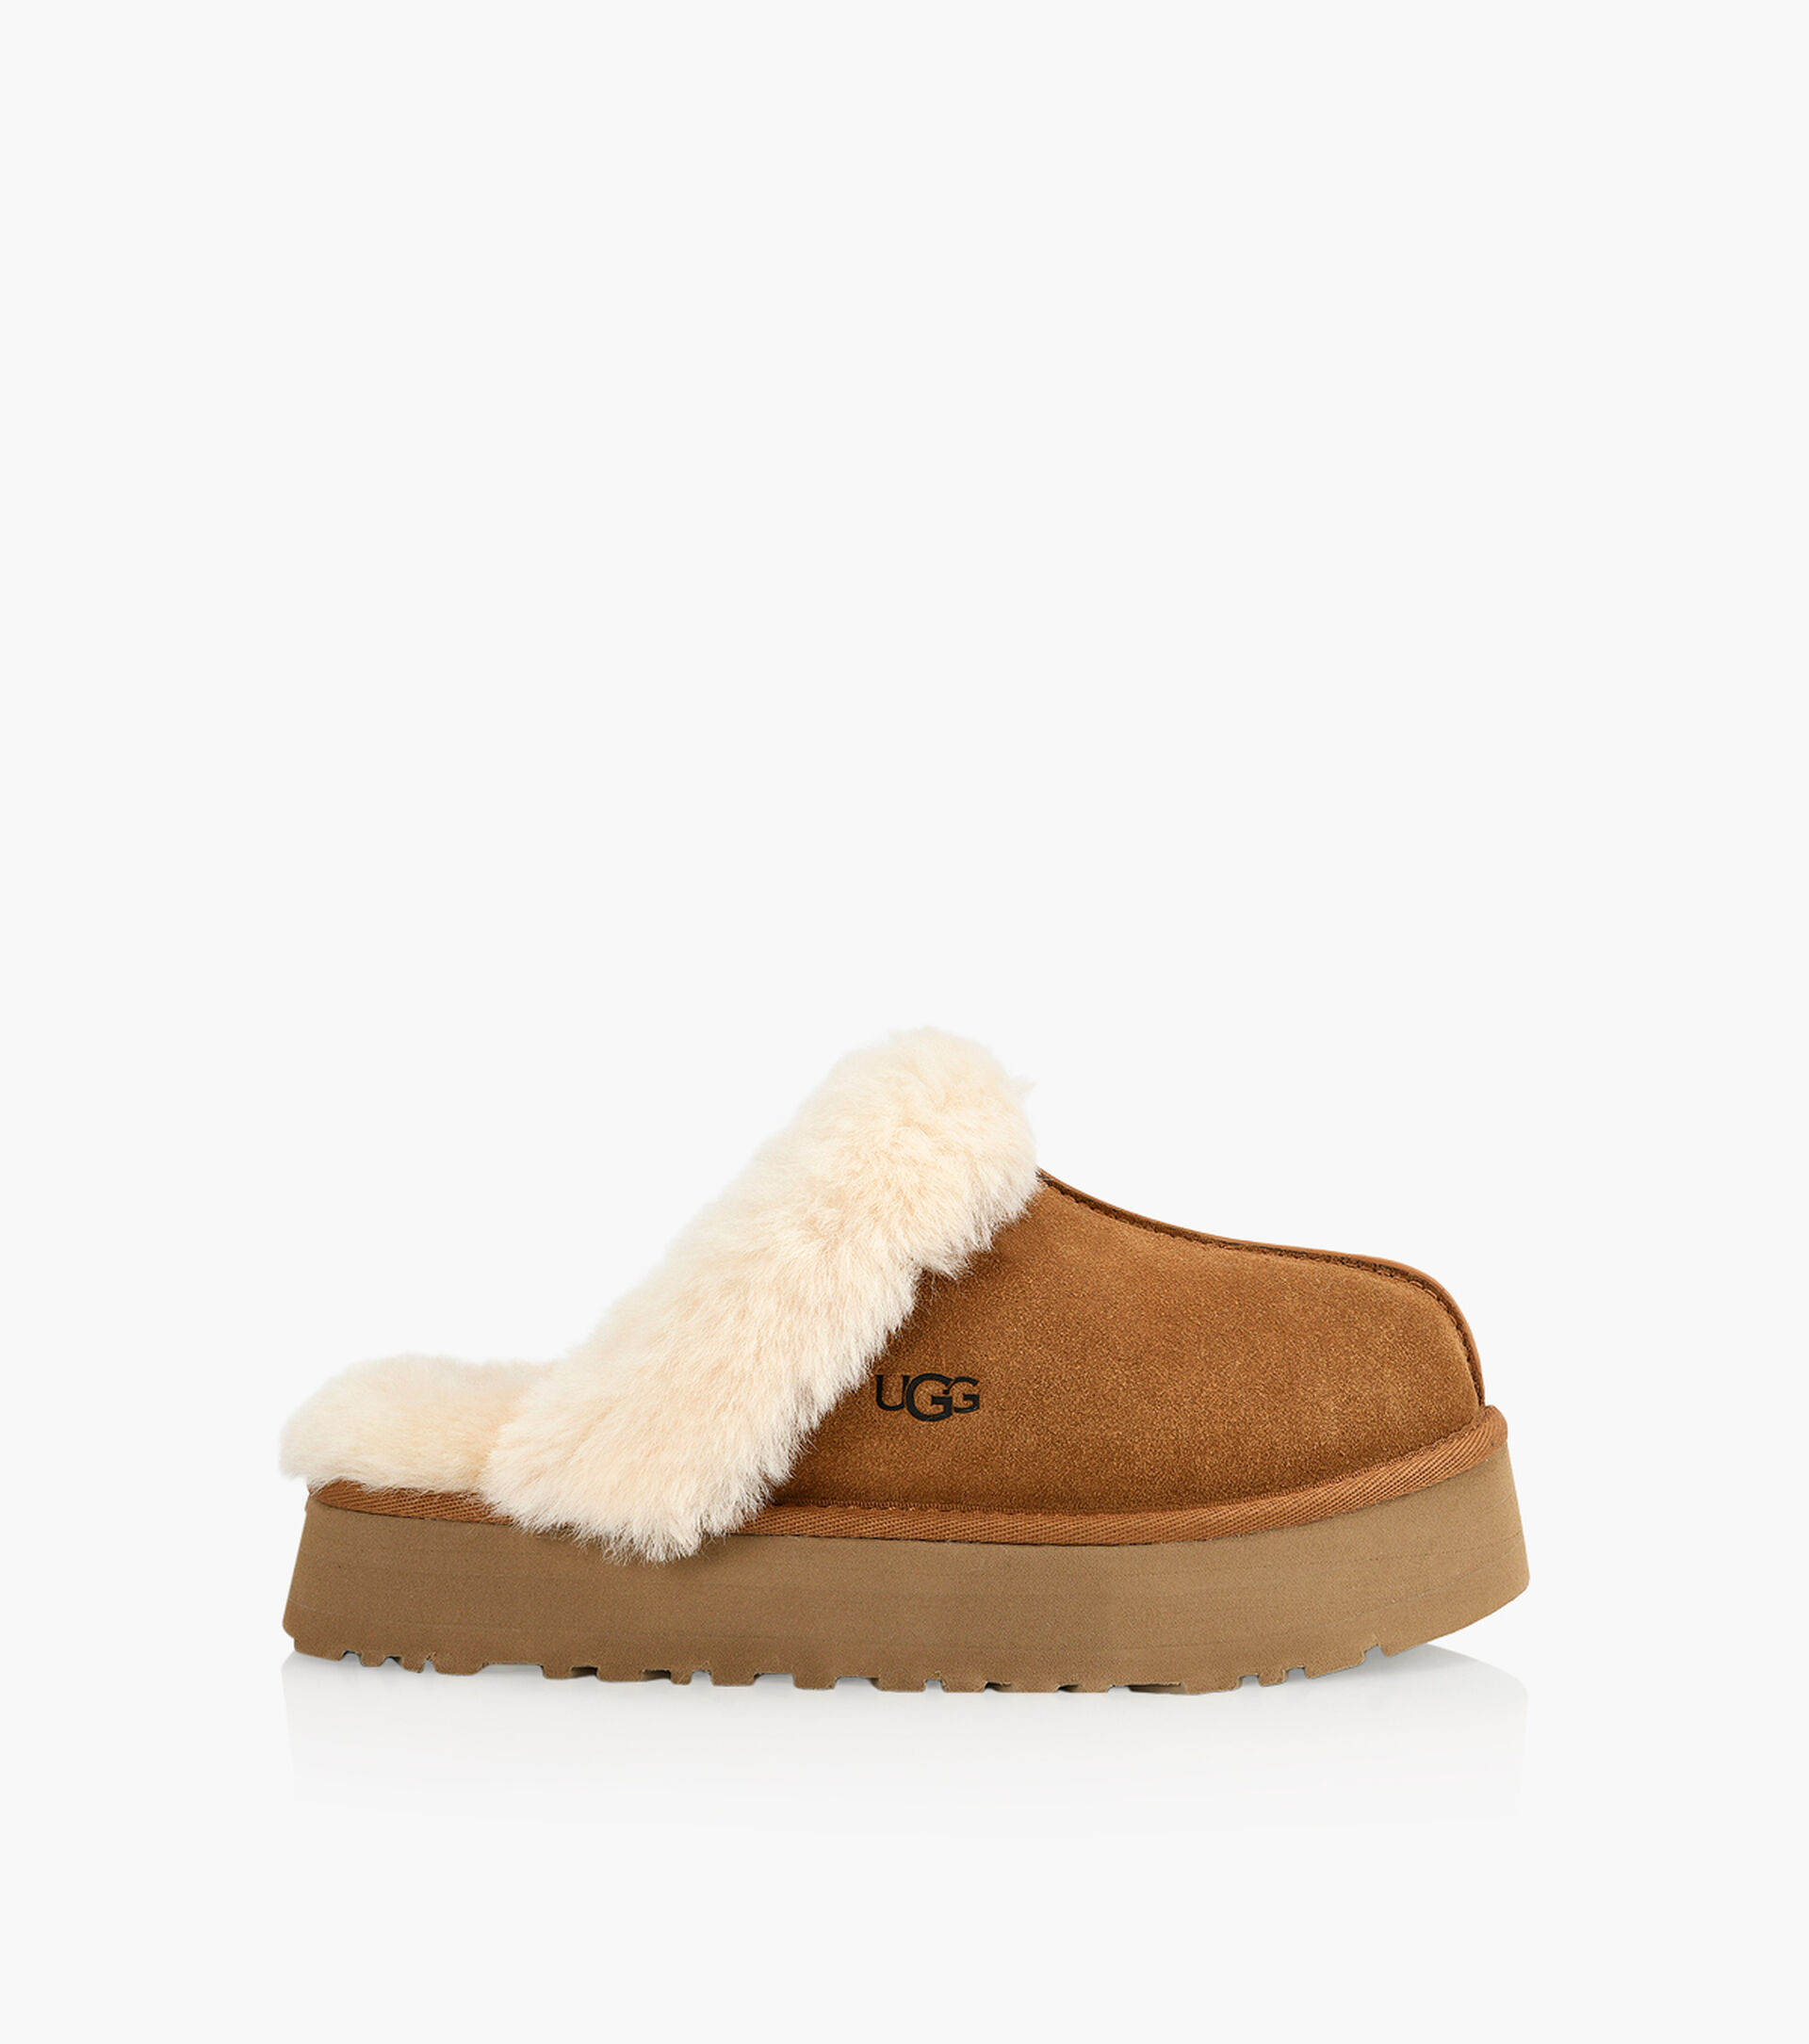 UGG DISQUETTE - Sheepskin | Browns Shoes